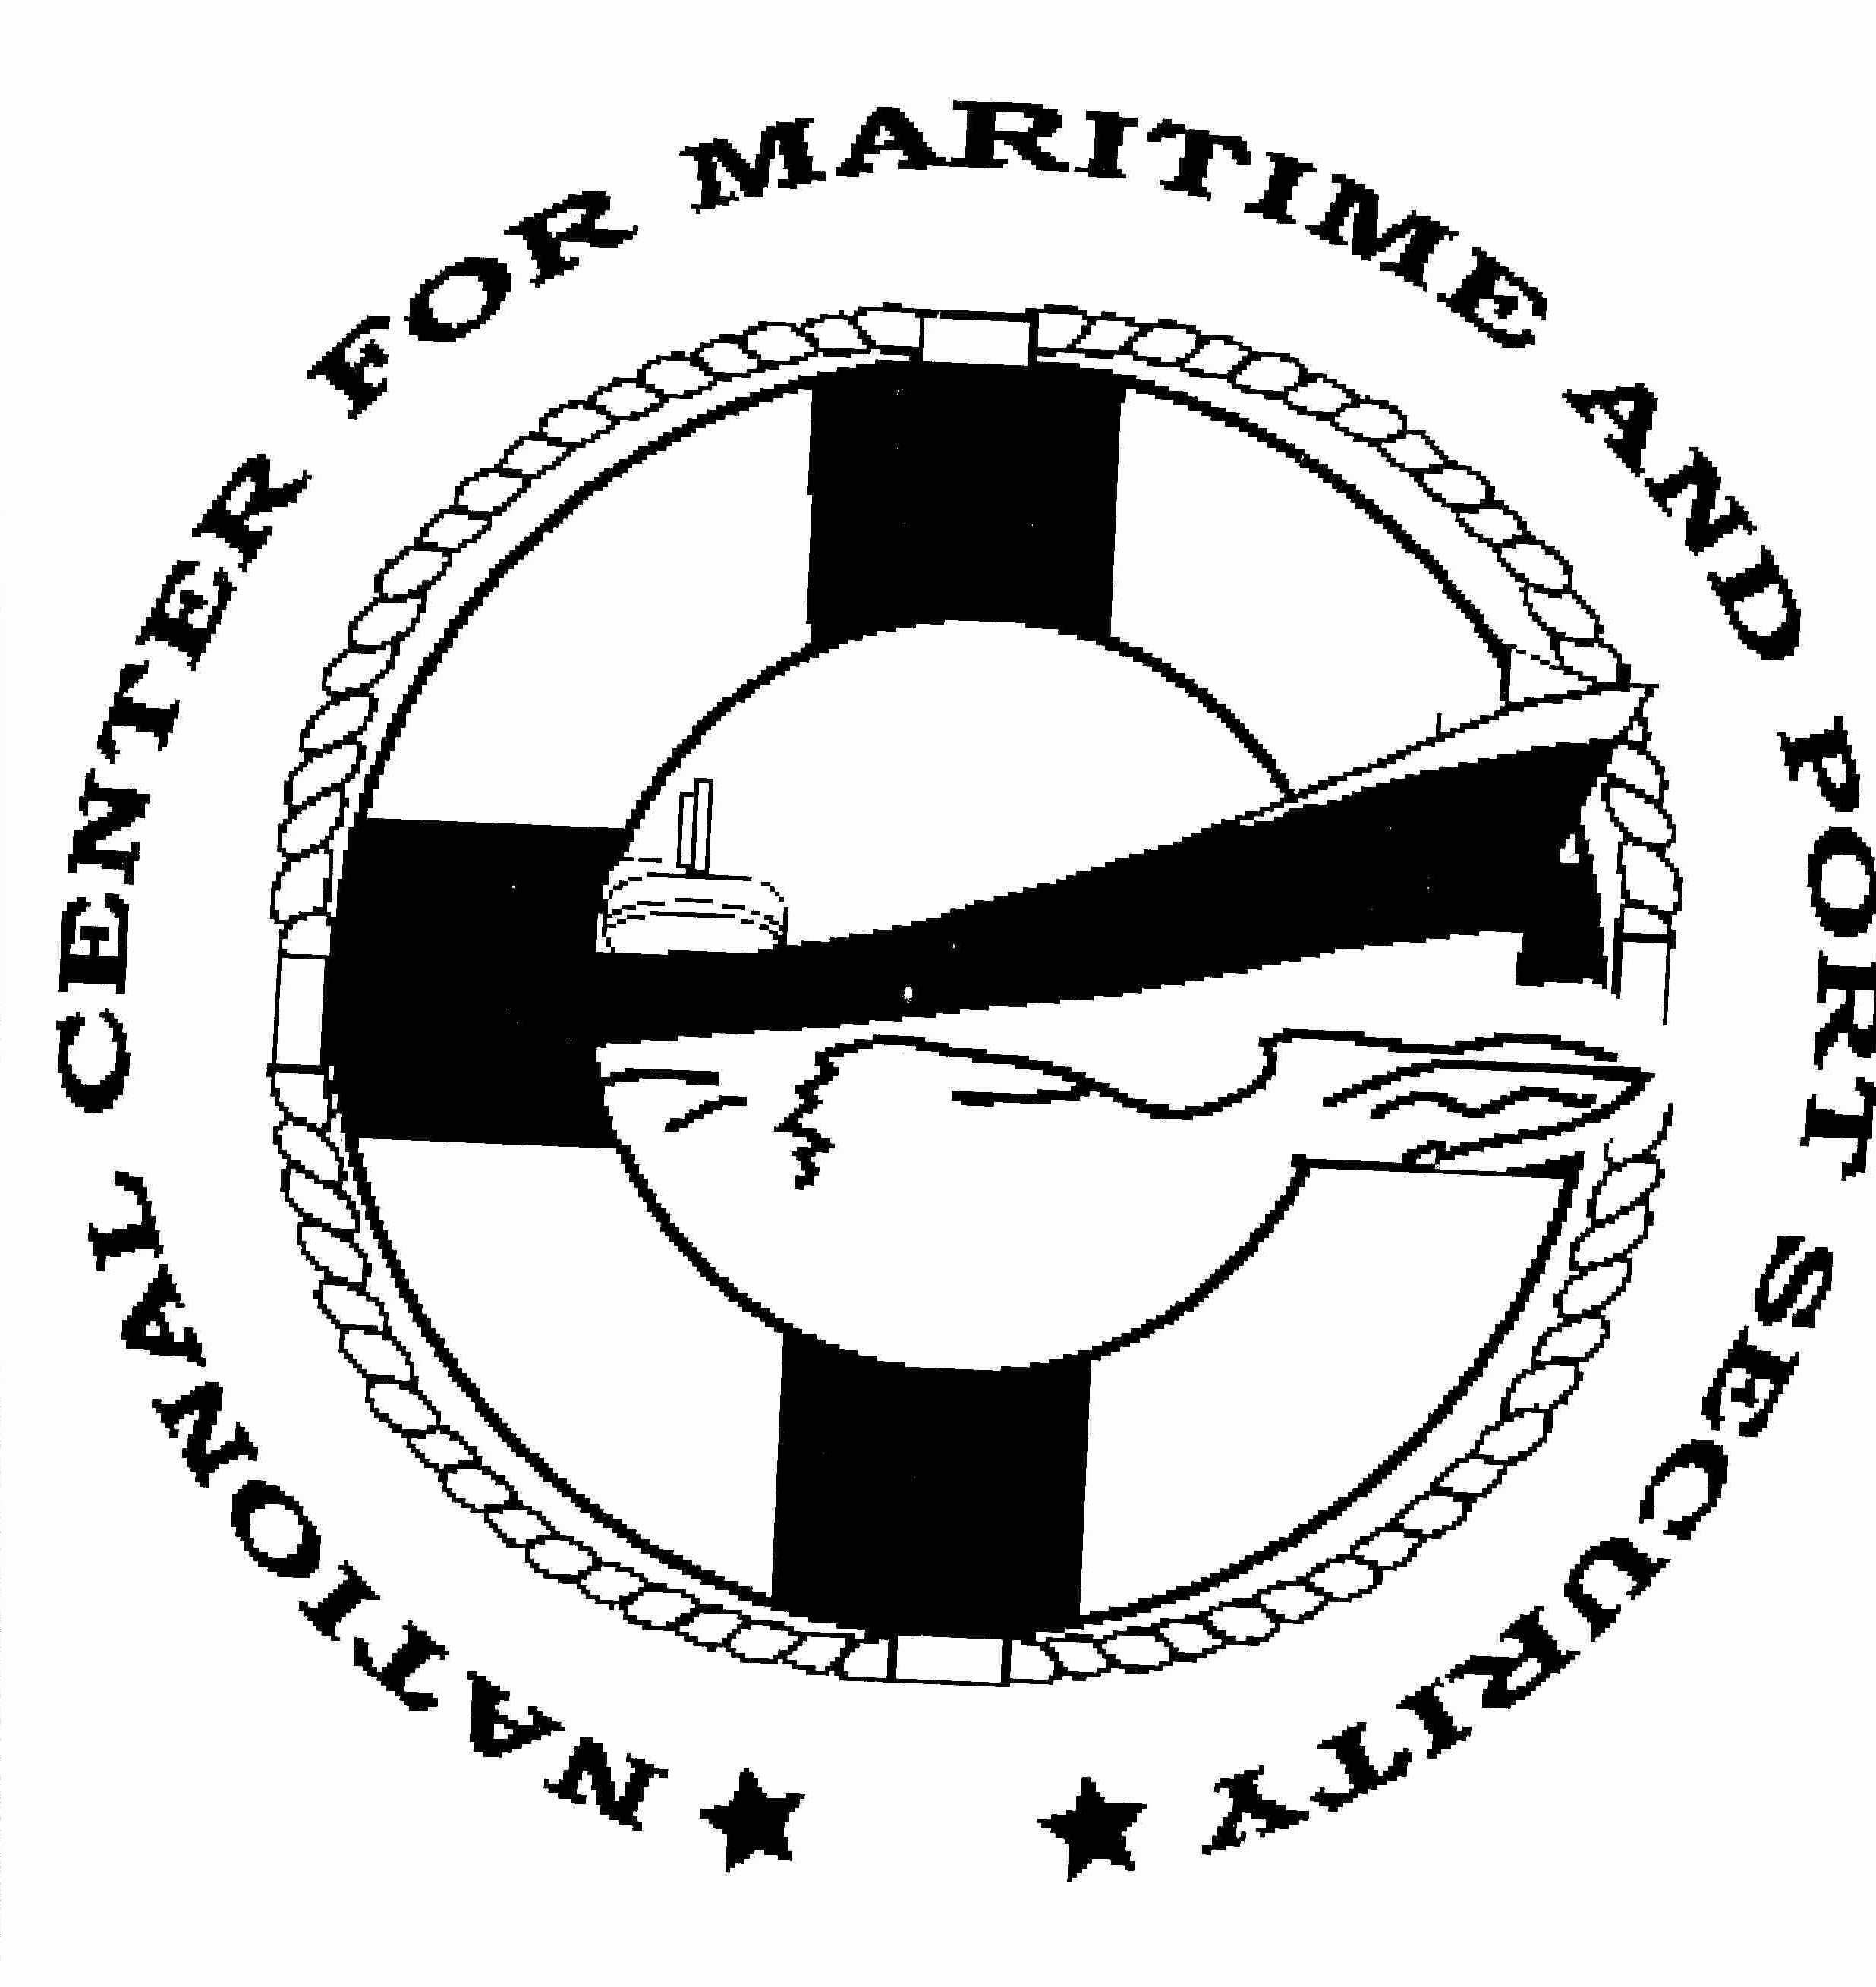  NATIONAL CENTER FOR MARITIME AND PORT SECURITY